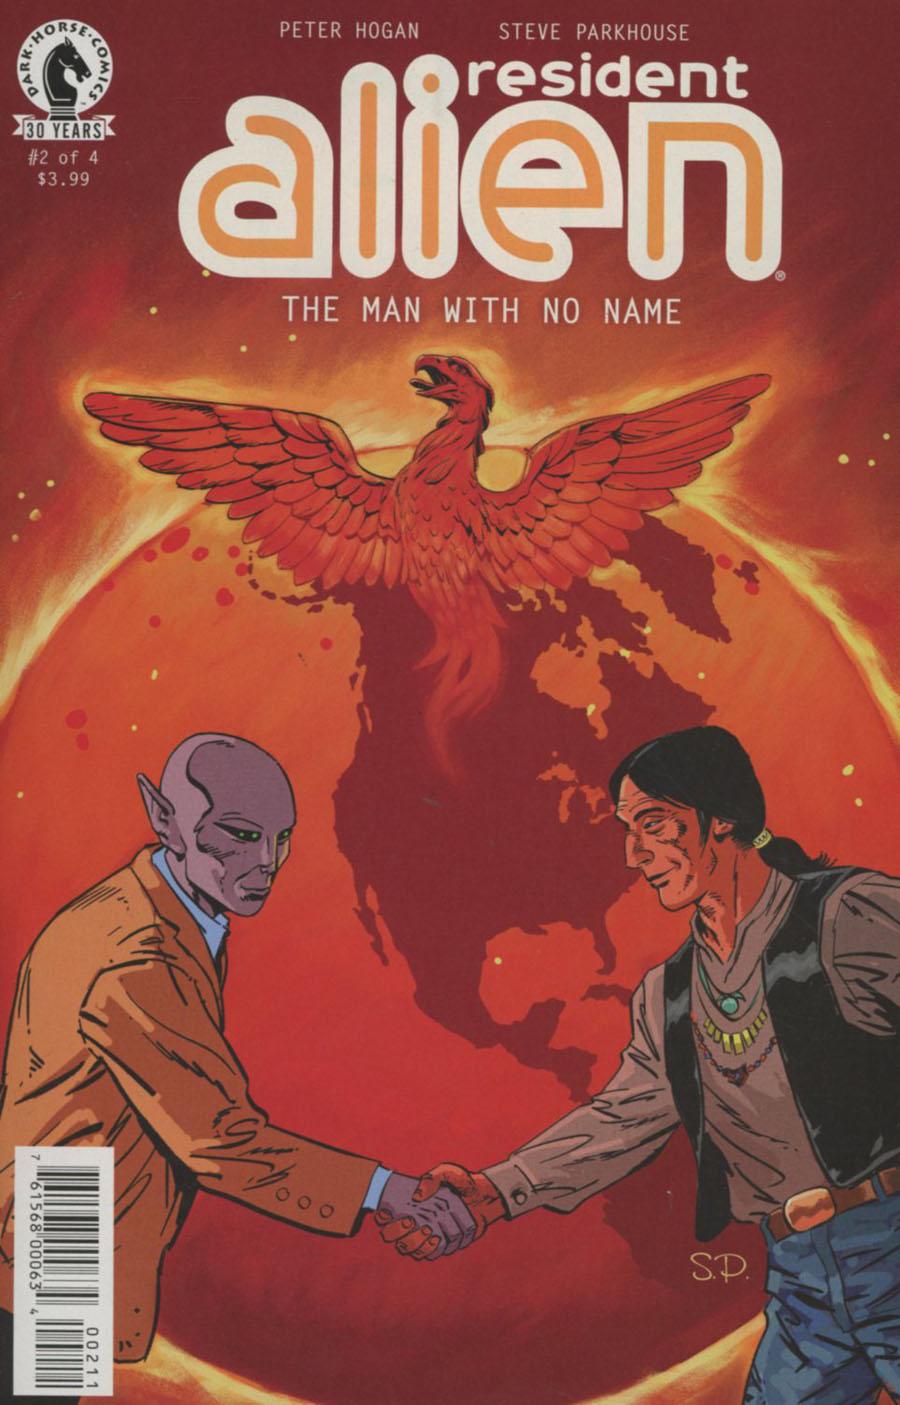 Resident Alien Man With No Name Vol. 1 #2